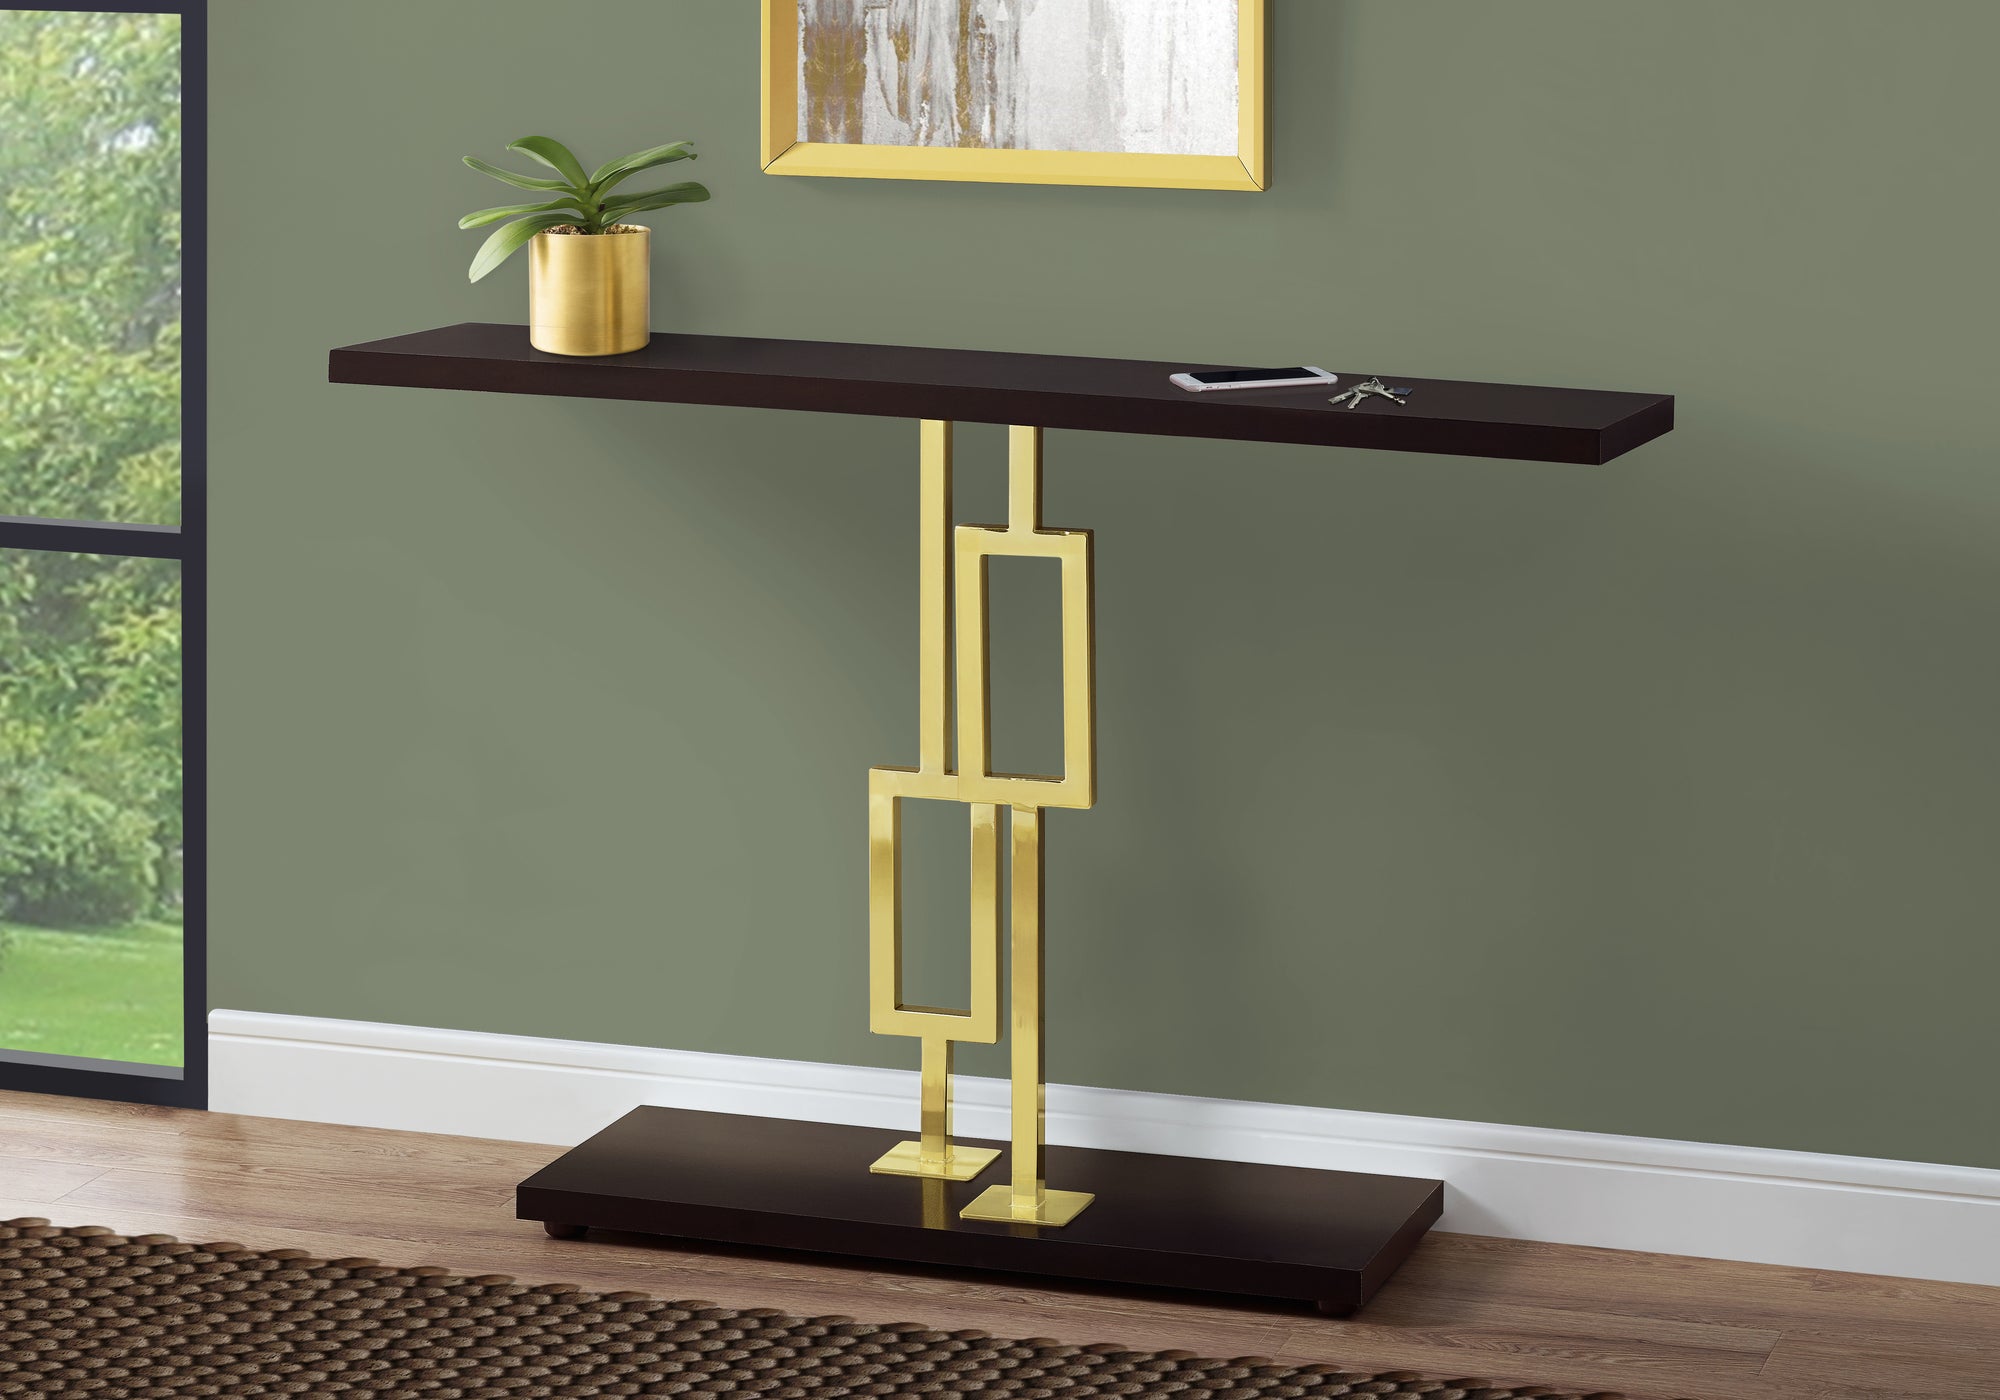 MN-103269    Accent Table, Console, Entryway, Narrow, Sofa, Living Room, Bedroom, Metal Base, Laminate, Dark Brown, Gold, Contemporary, Modern